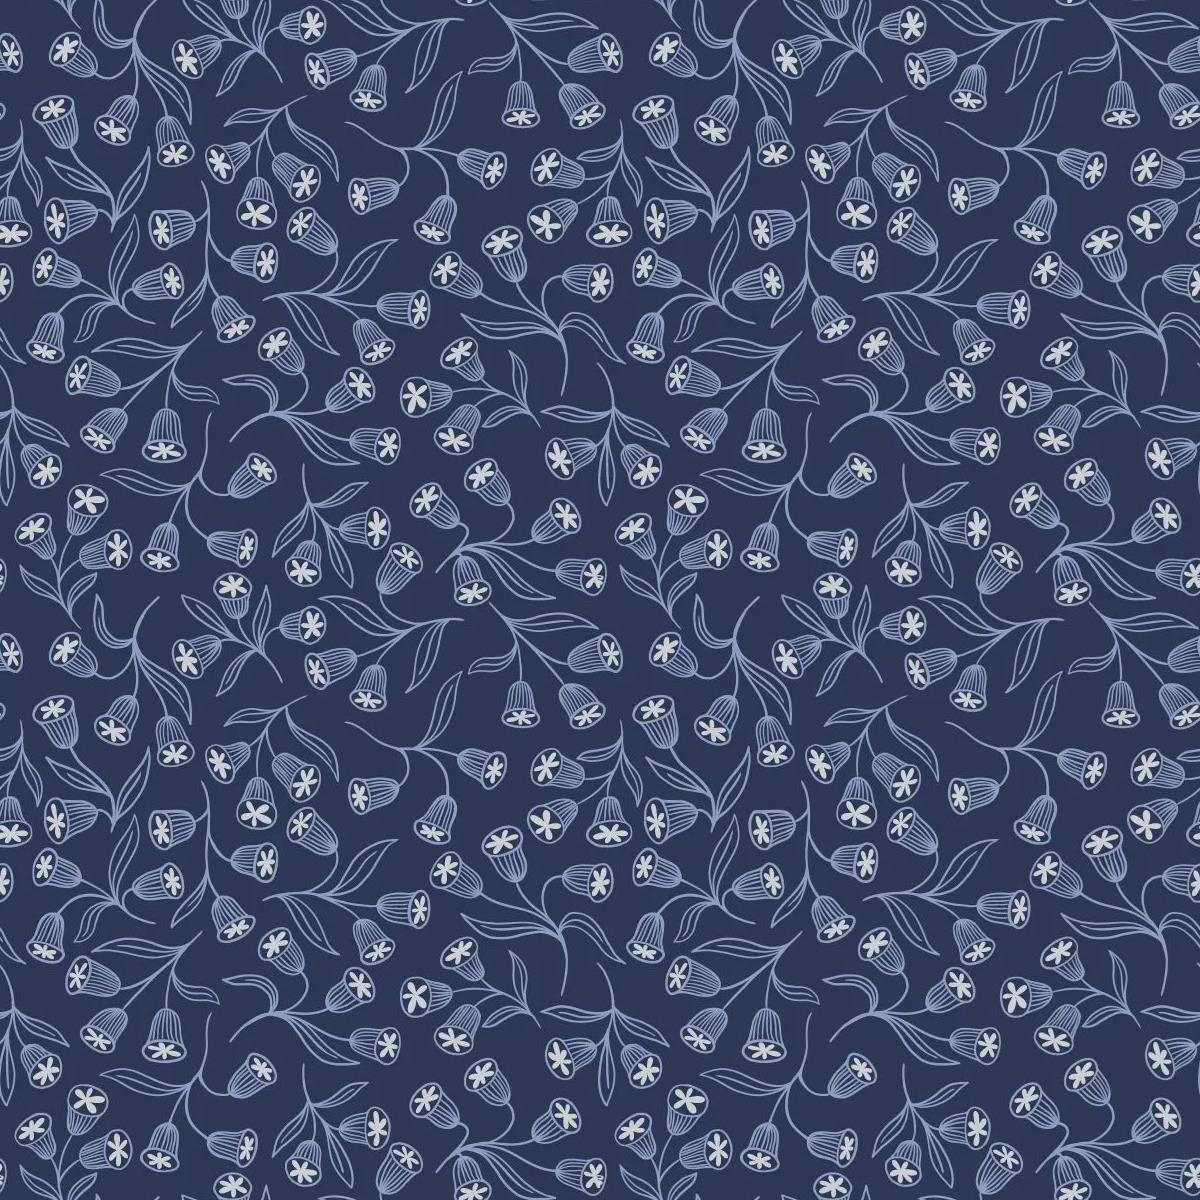 /images/product-images/2020images/FashionFabric/CraftCotton/LINov21/A544.2-Enchanted-flowers-on-dark-blue-with-silver-metallic.jpg